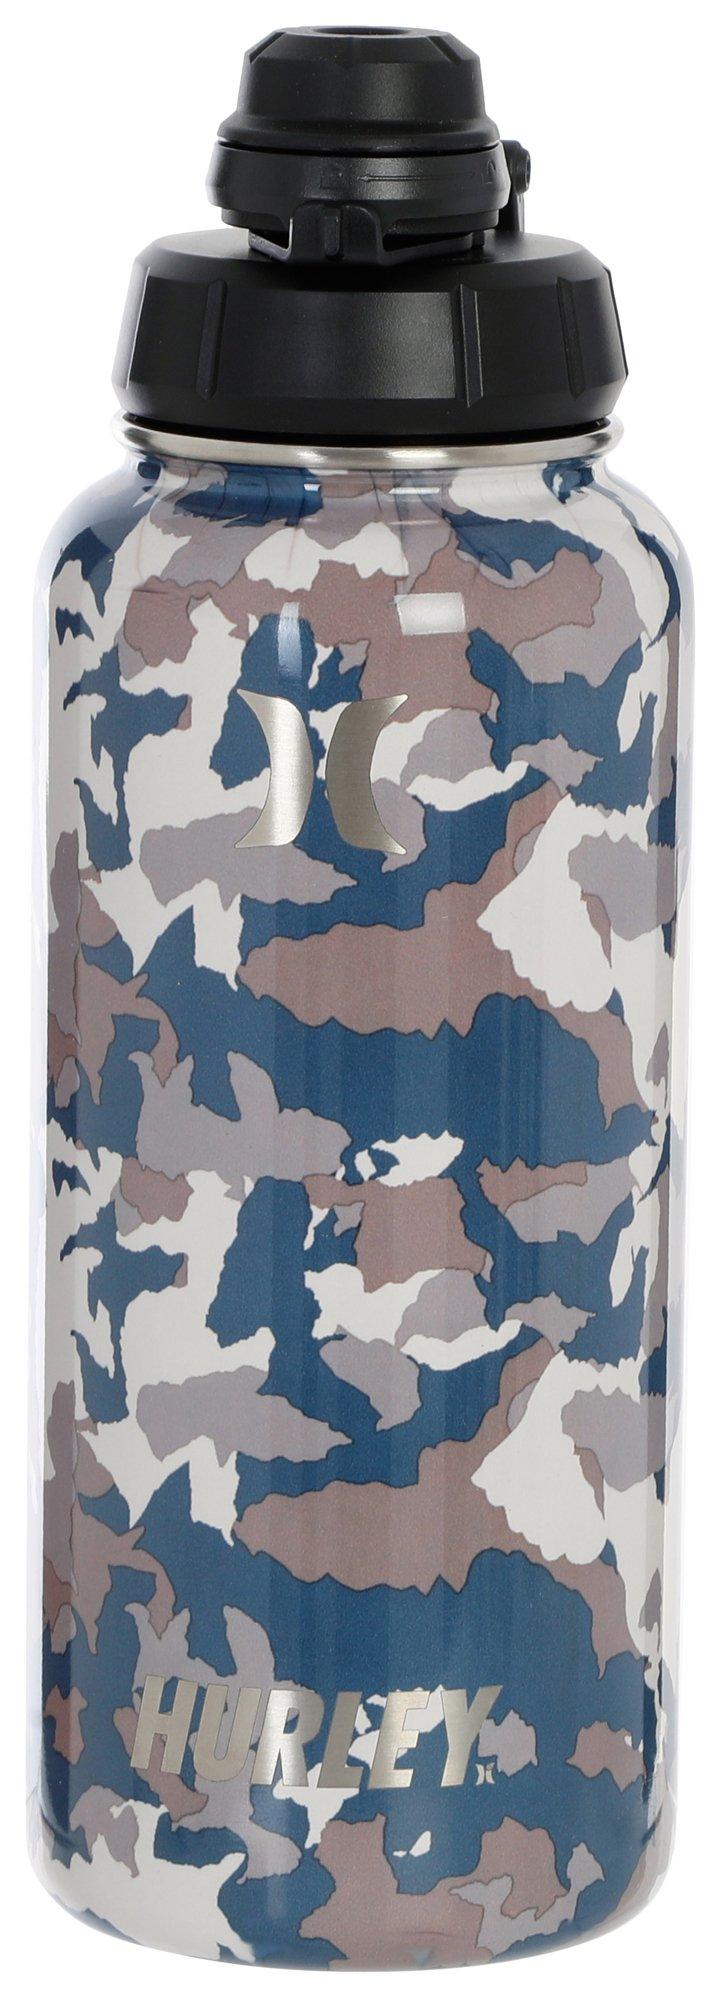 32 oz Camo Print Stainless Steel Insulated Water Bottle